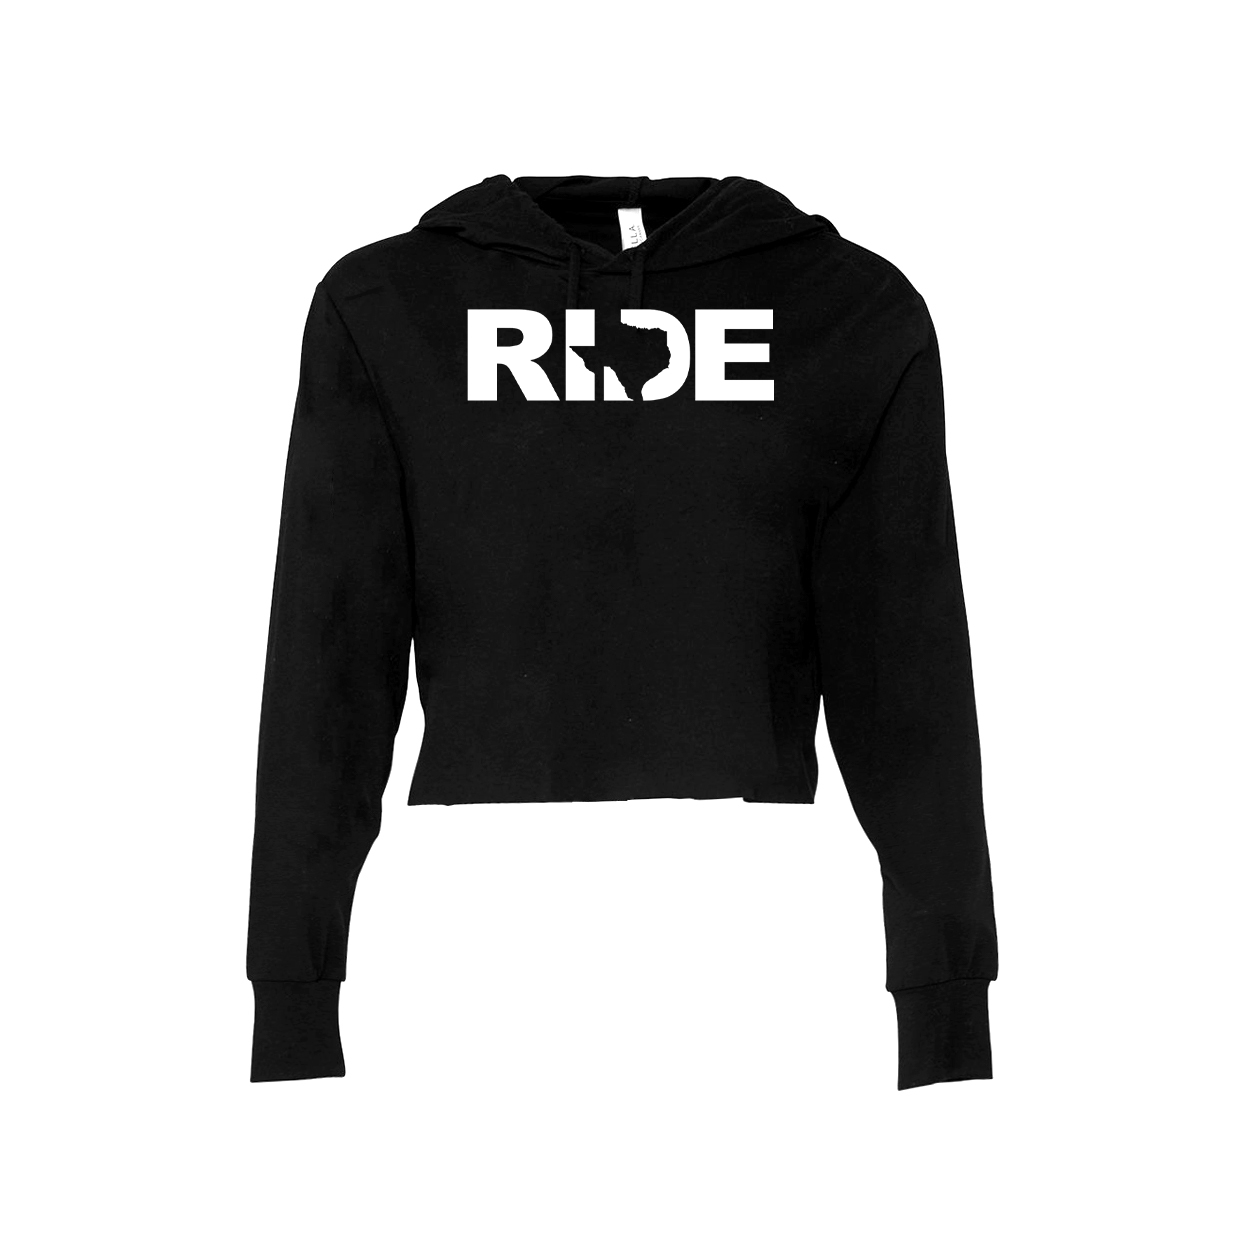 Ride Texas Classic Womens Long Sleeve Cropped Hooded Tee Black 